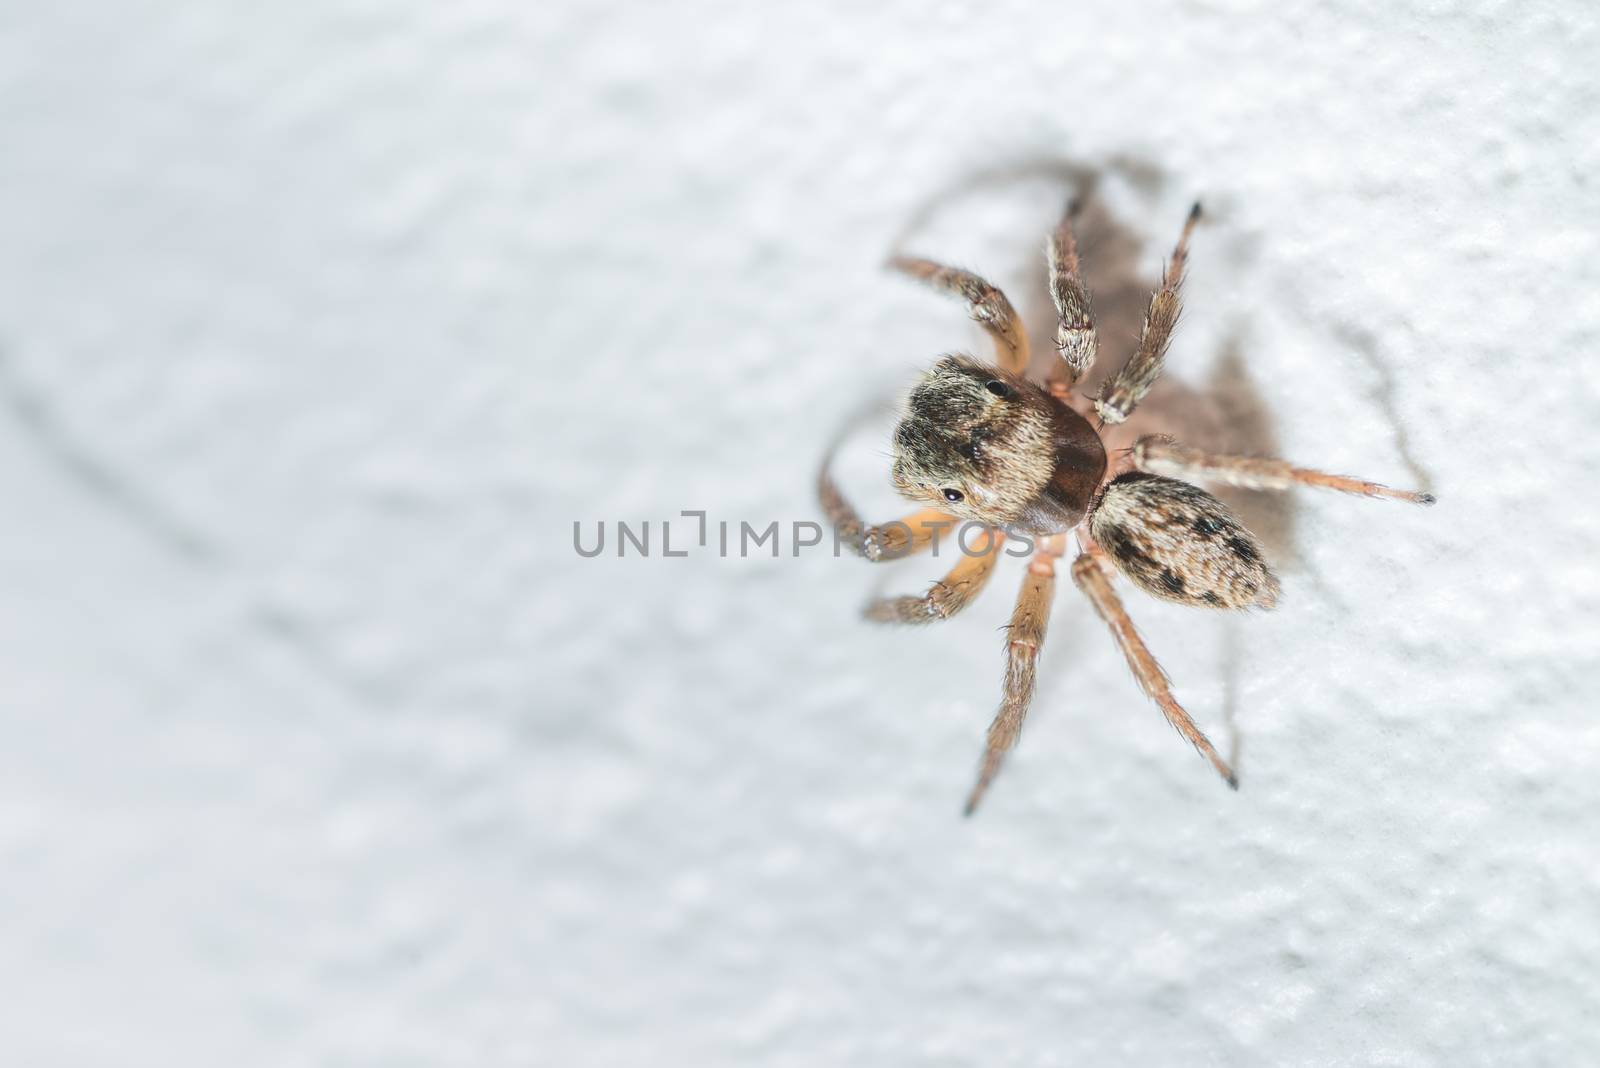 Jumping Spider by justtscott